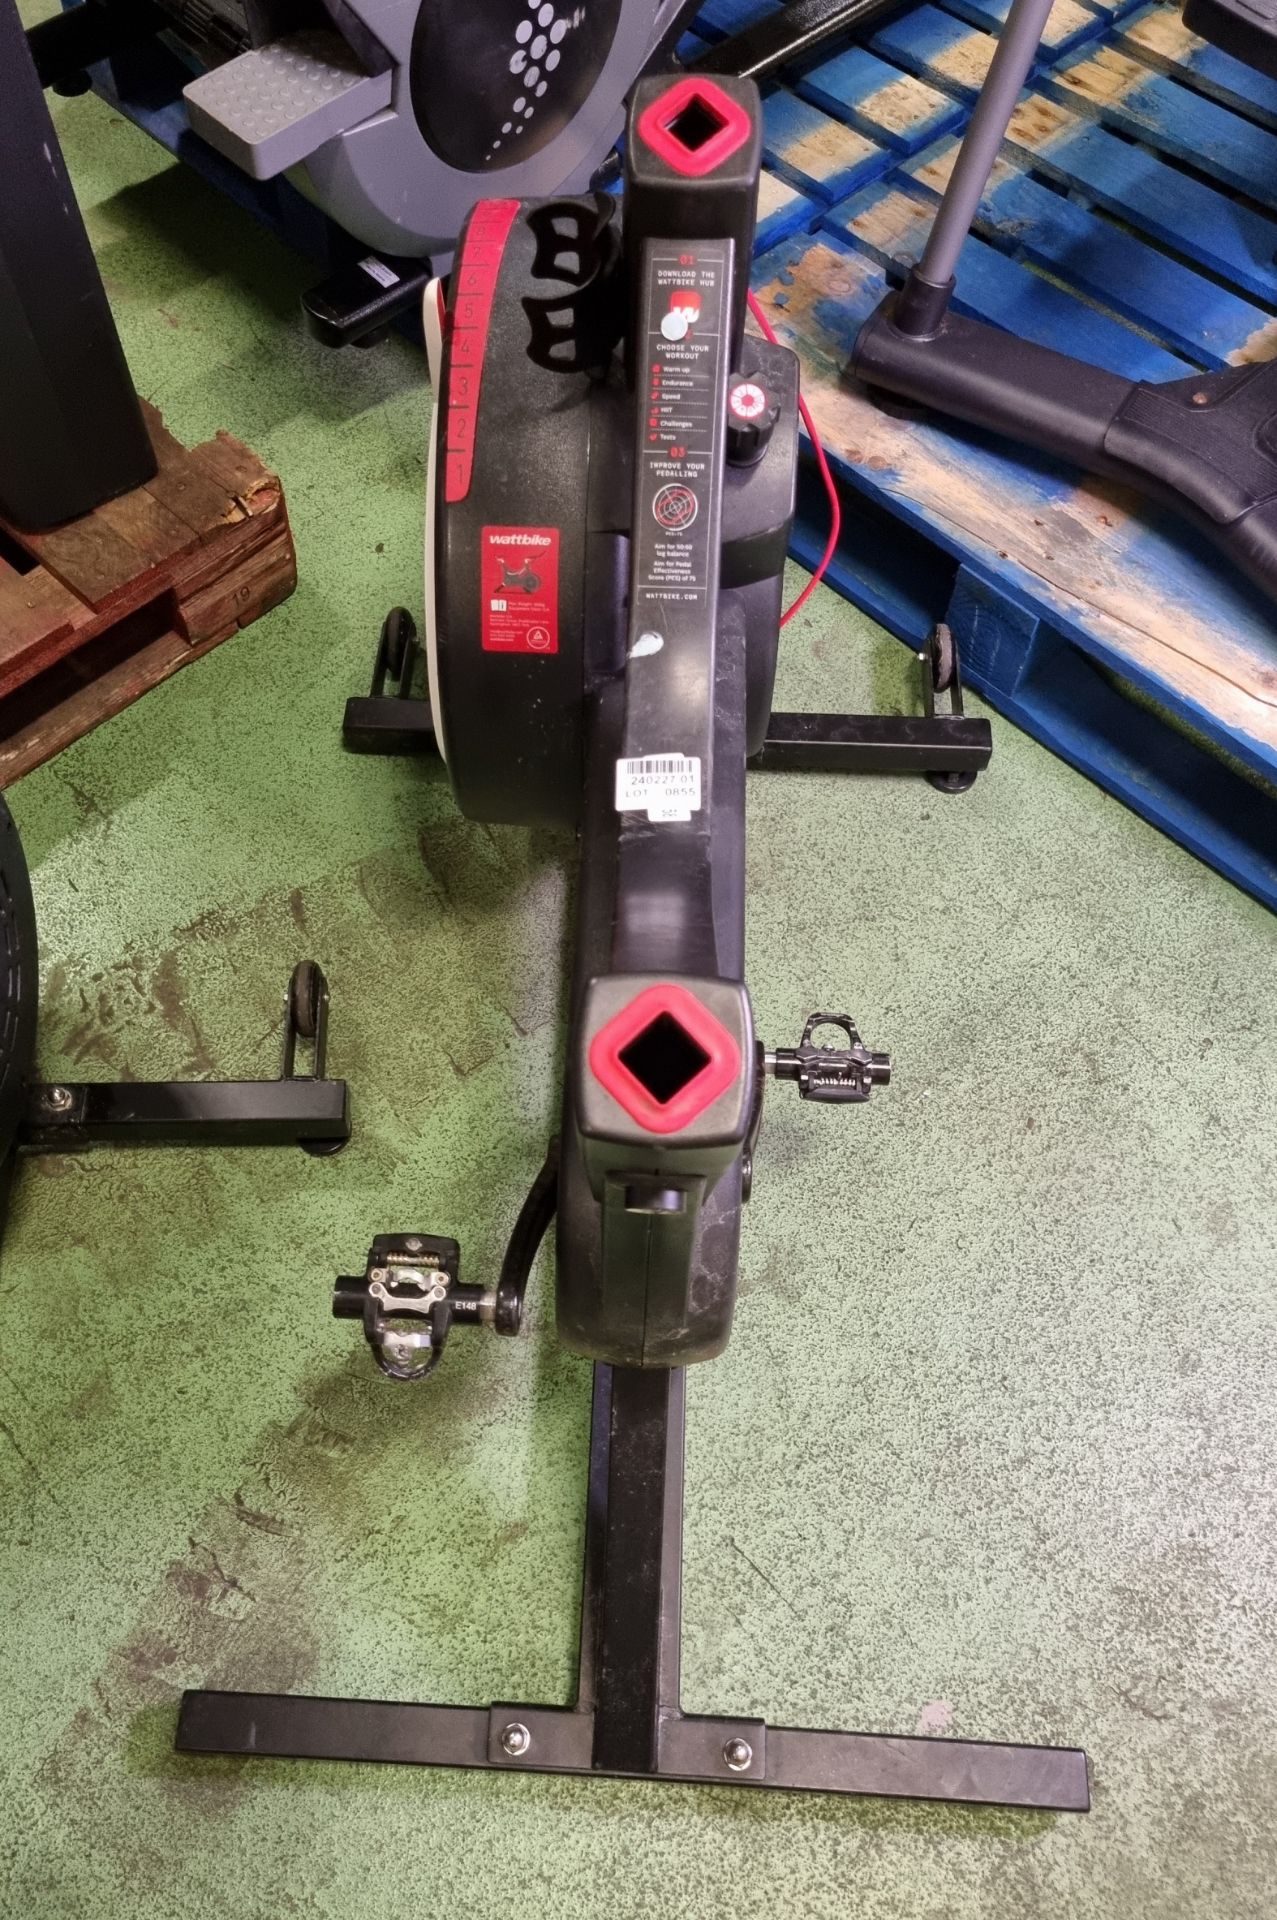 Wattbike Trainer indoor exercise bike - BODY ONLY - missing handle bars, display and saddle - Image 4 of 5